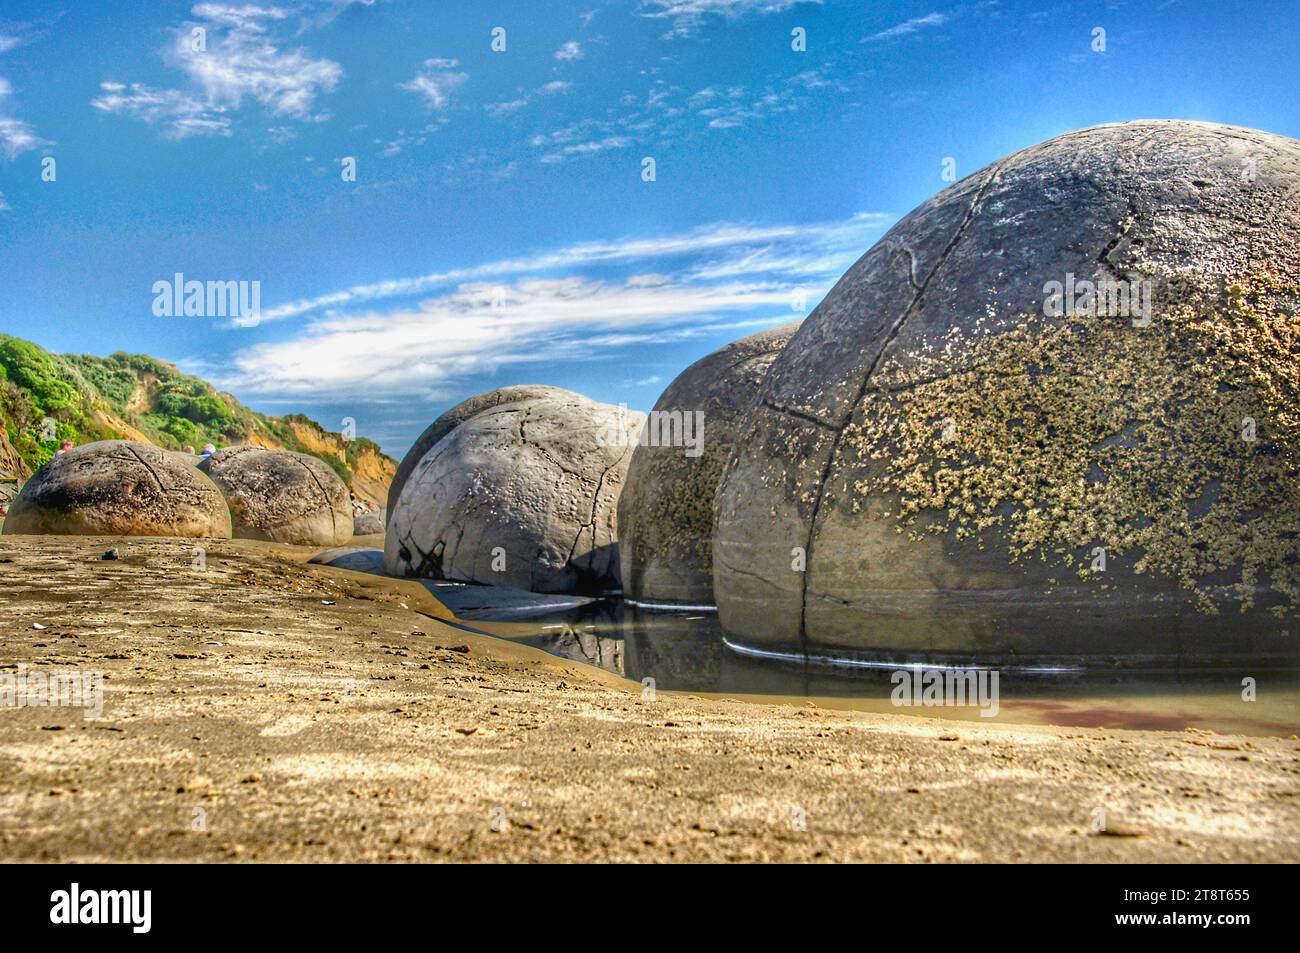 Moeraki Boulders. HDR, The Moeraki Boulders / Kaihinaki are unusually large spherical boulders lying along a stretch of Koekohe Beach on the wave-cut Otago coast of New Zealand between Moeraki and Hampden. They occur scattered either as isolated or clusters of boulders within a stretch of beach where they have been protected in a scientific reserve. These boulders are grey-colored septarian concretions, which have been exhumed from the mudstone and bedrock enclosing them and concentrated on the beach by coastal erosion Stock Photo